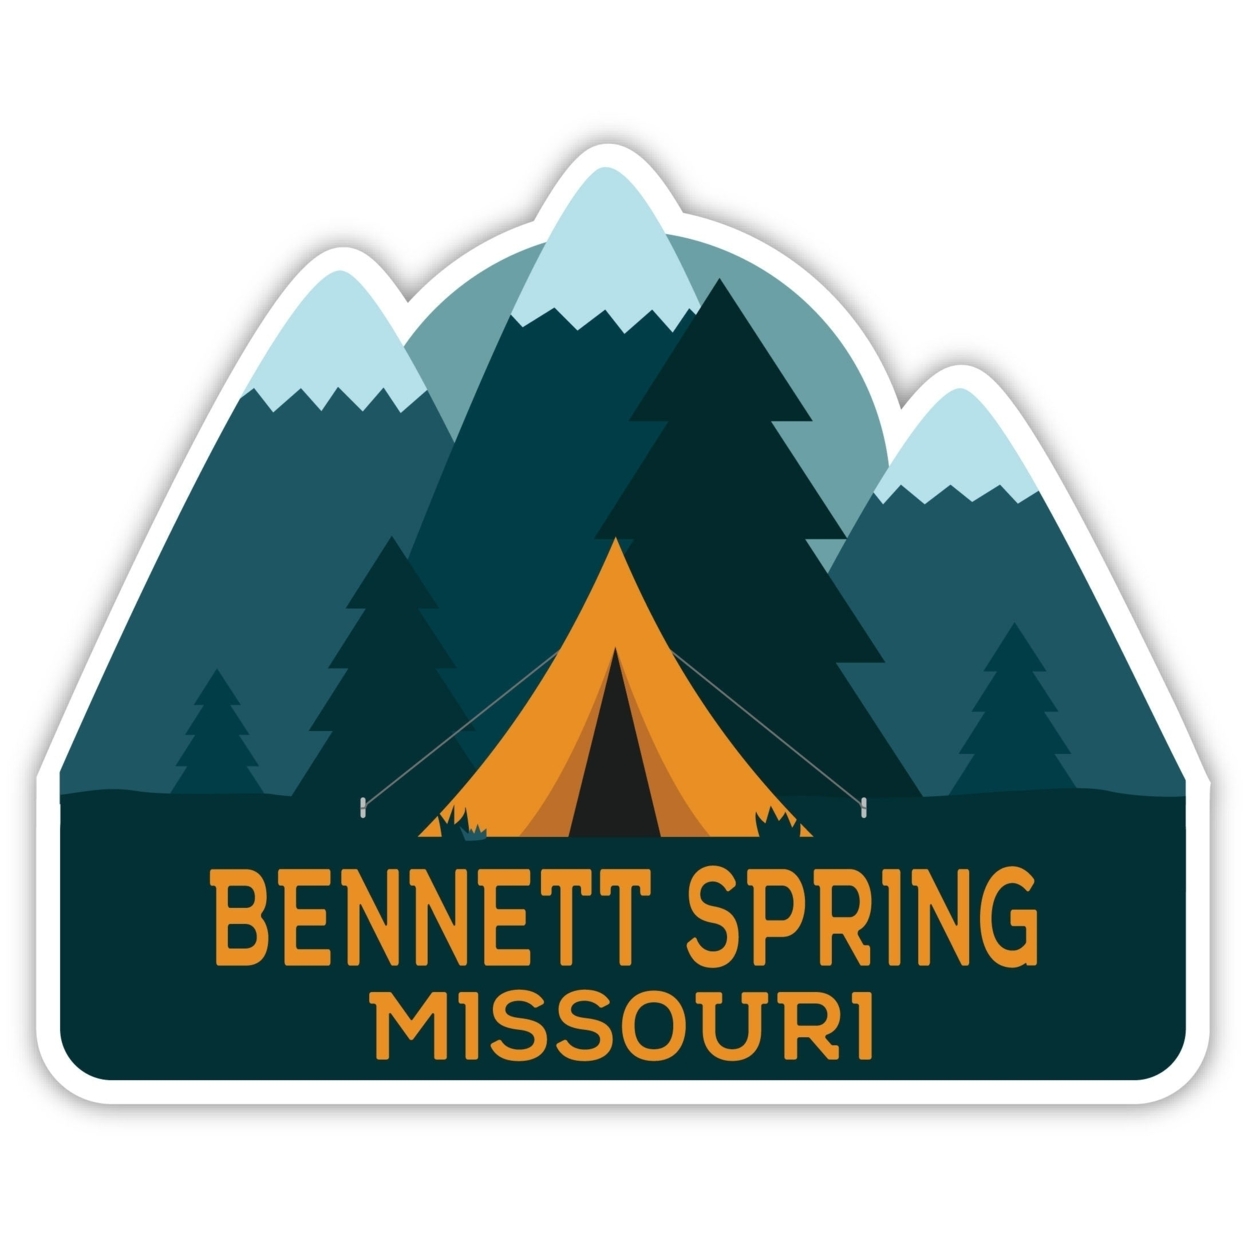 Bennett Spring Missouri Souvenir Decorative Stickers (Choose Theme And Size) - 4-Pack, 12-Inch, Tent